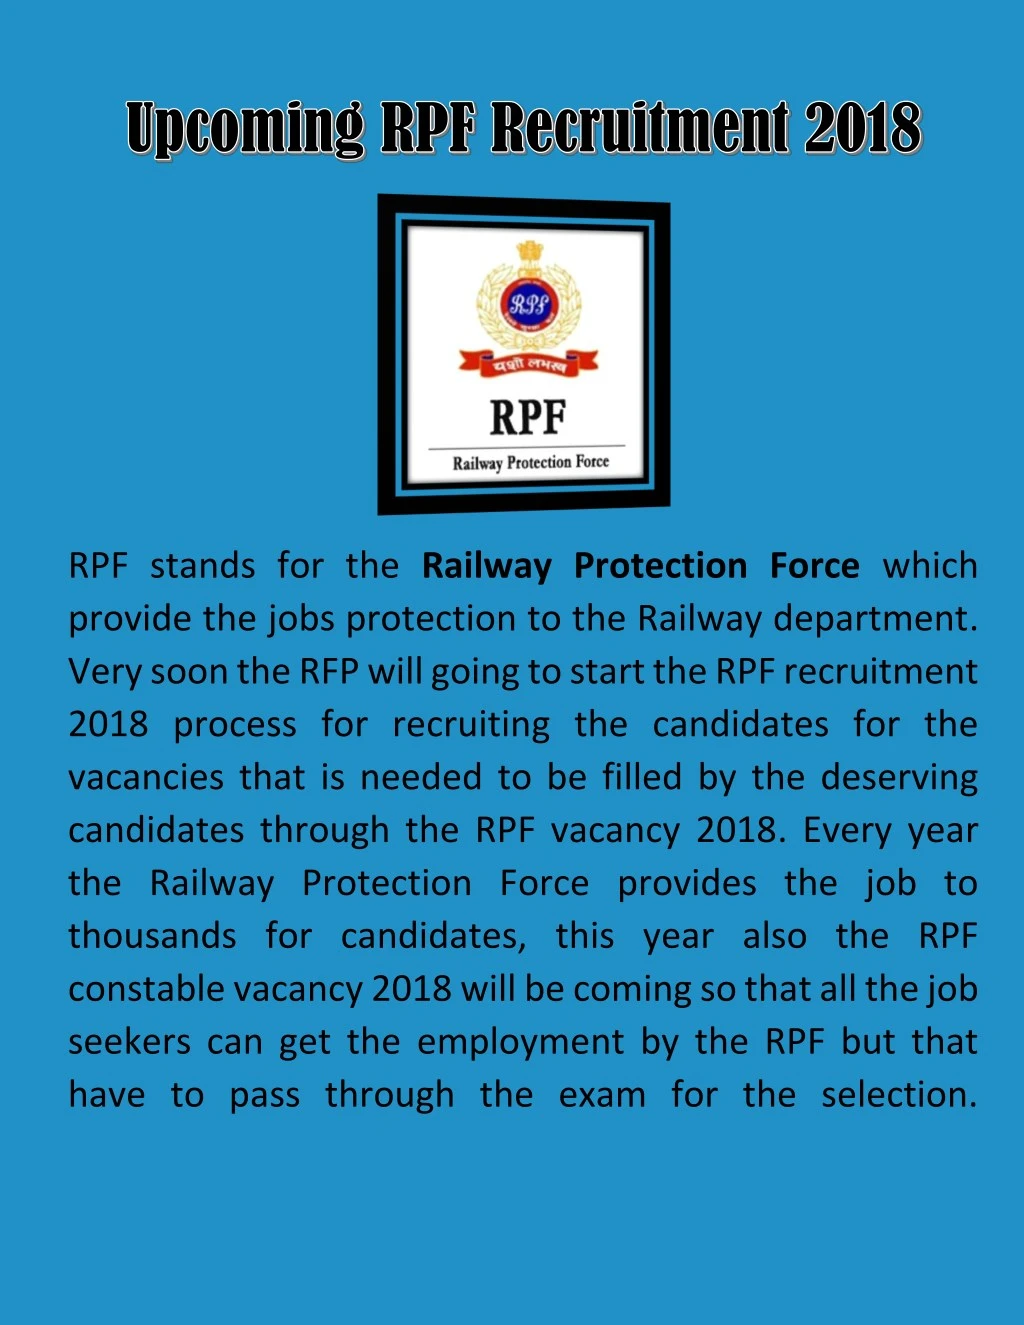 rpf stands for the railway protection force which